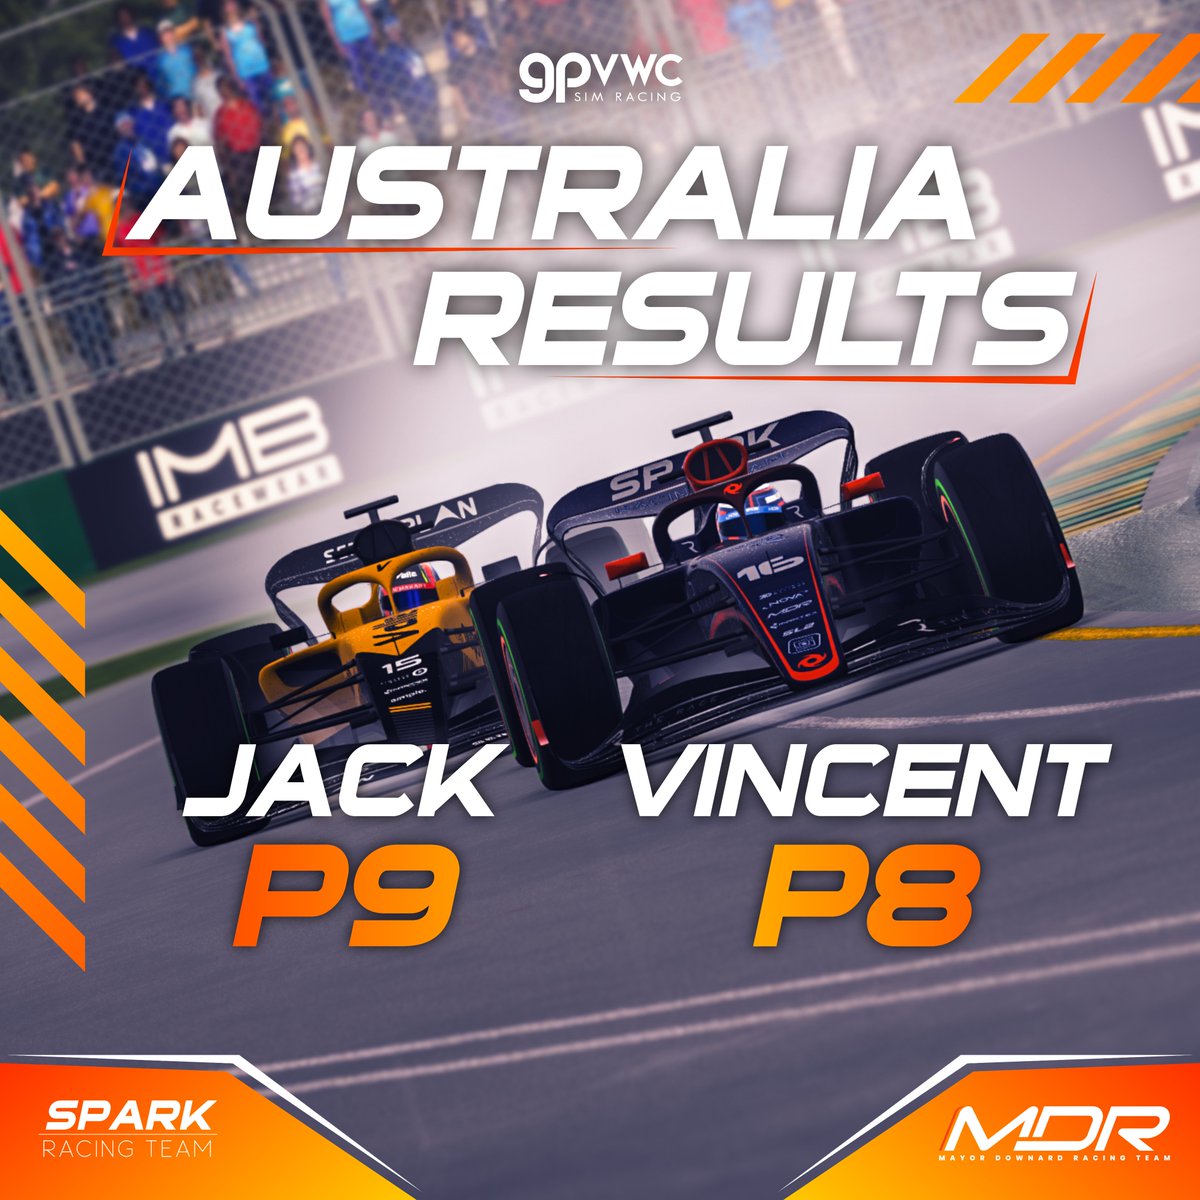 The conditions yesterday were challenging, but we managed to collect some points, putting us in P3 in the championship standings. #gpvwc #SL2 #simracing #esports #MelbourneGP #top